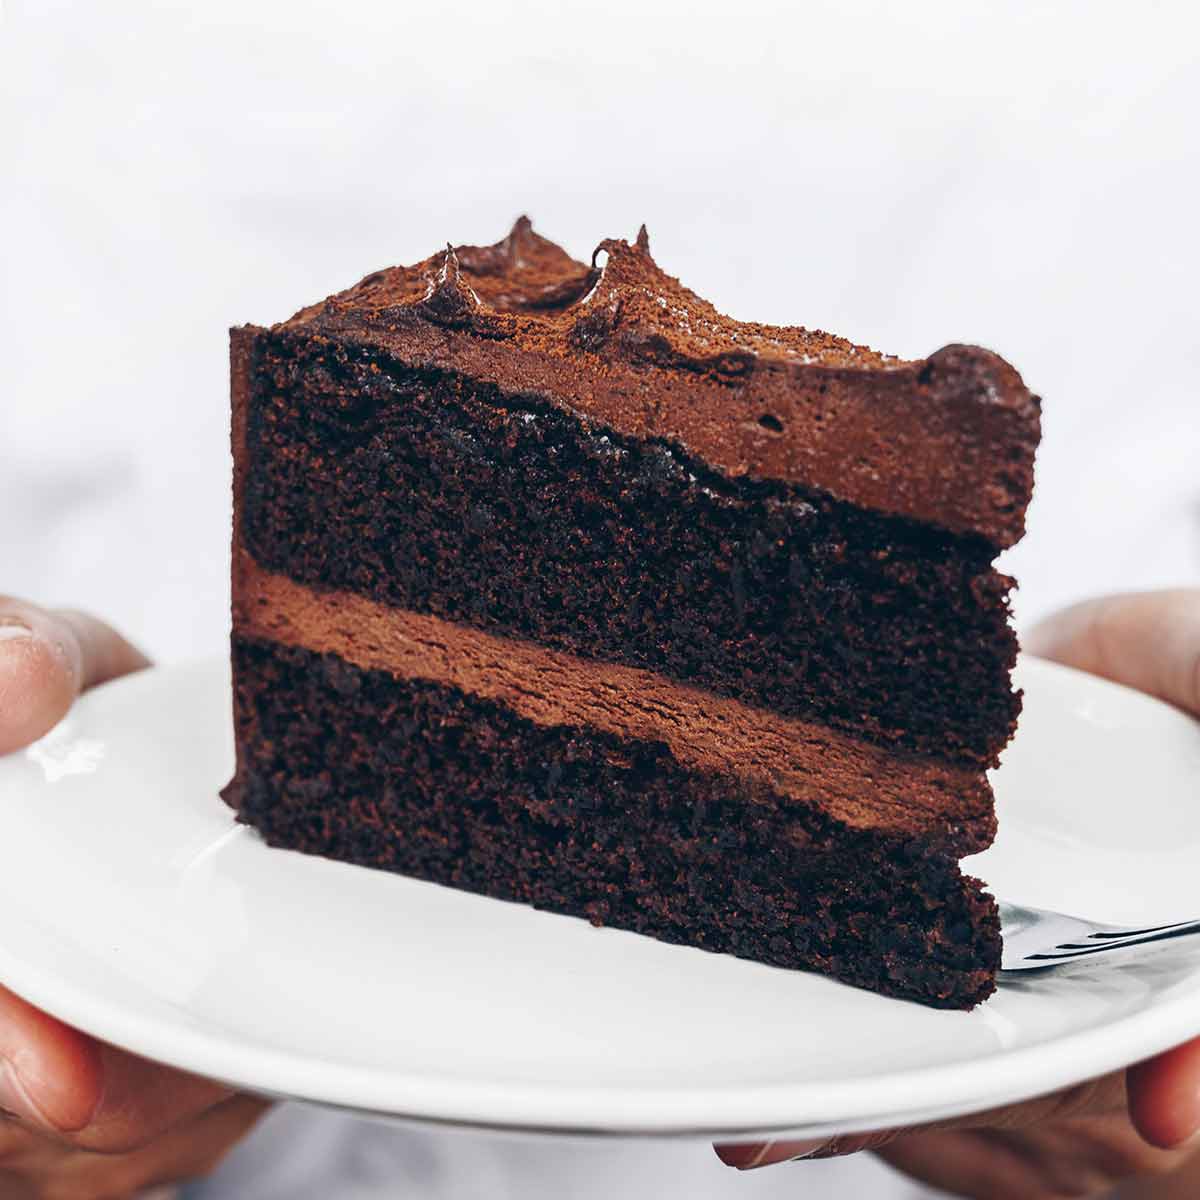 A person holding a plate with a slice of basic chocolate cake on it.